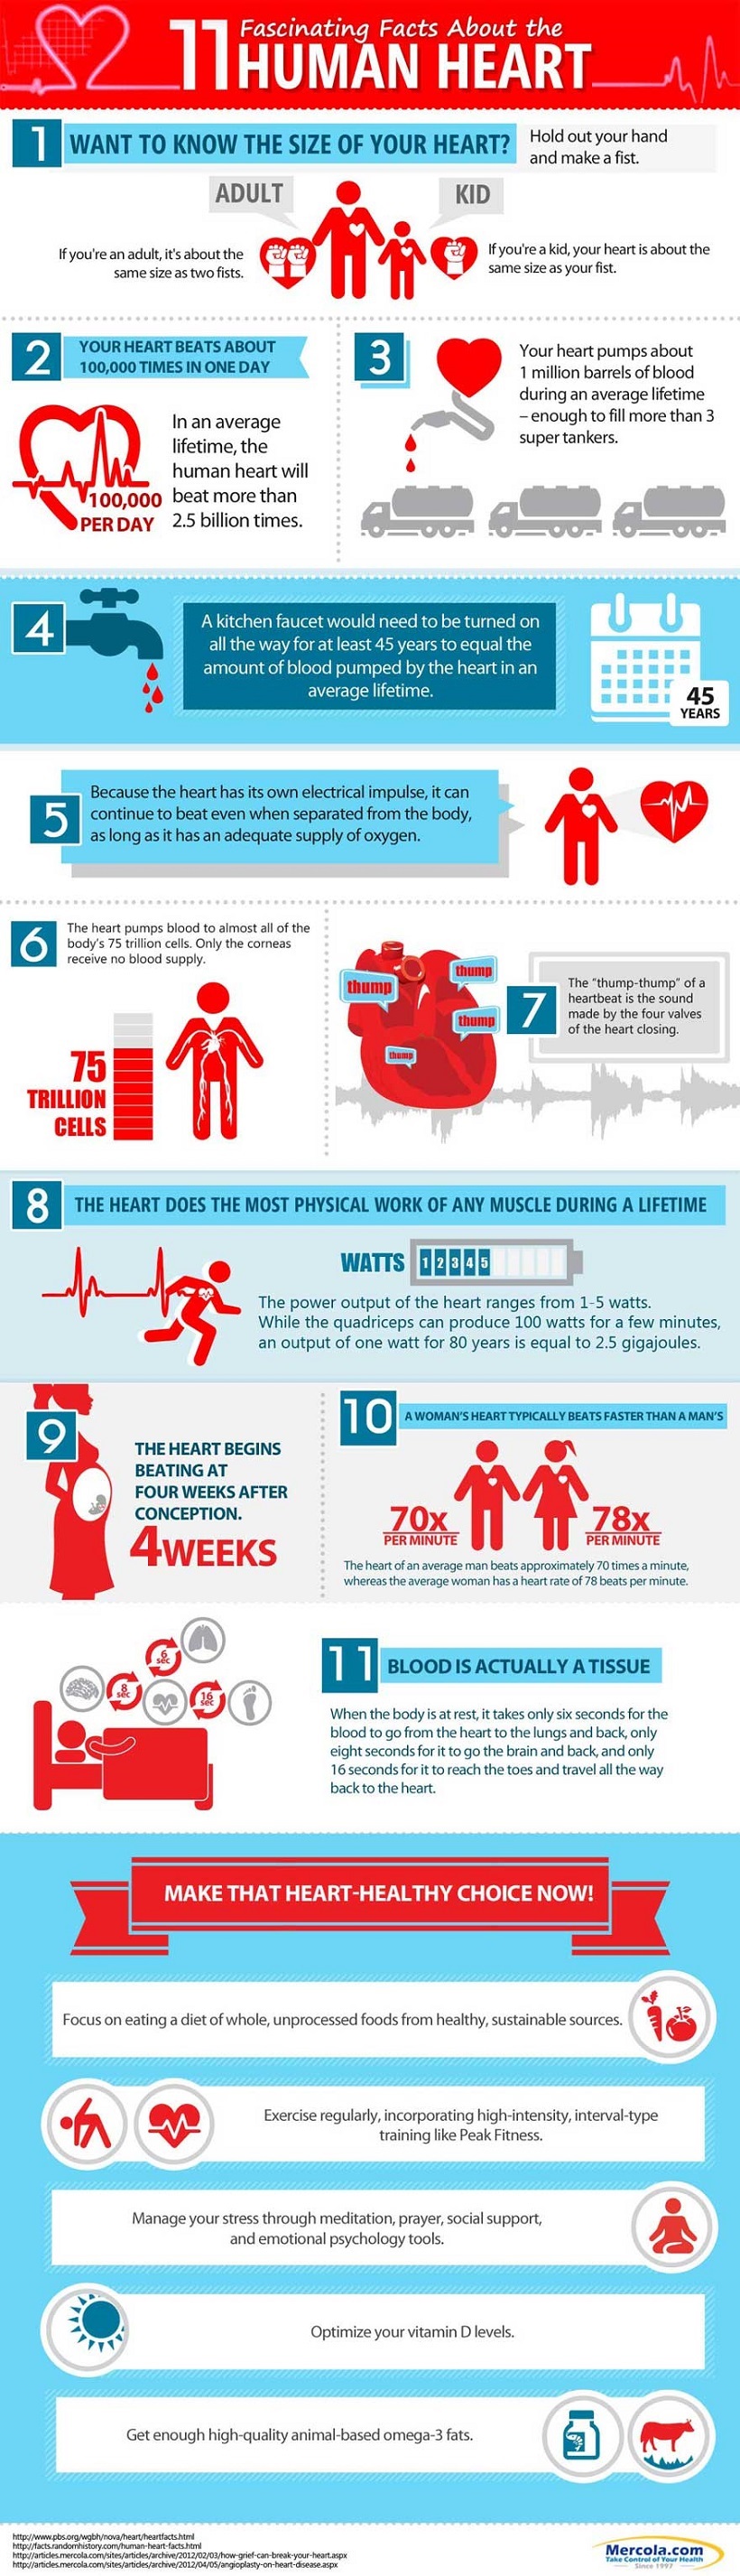 Fascinating Facts Infographic